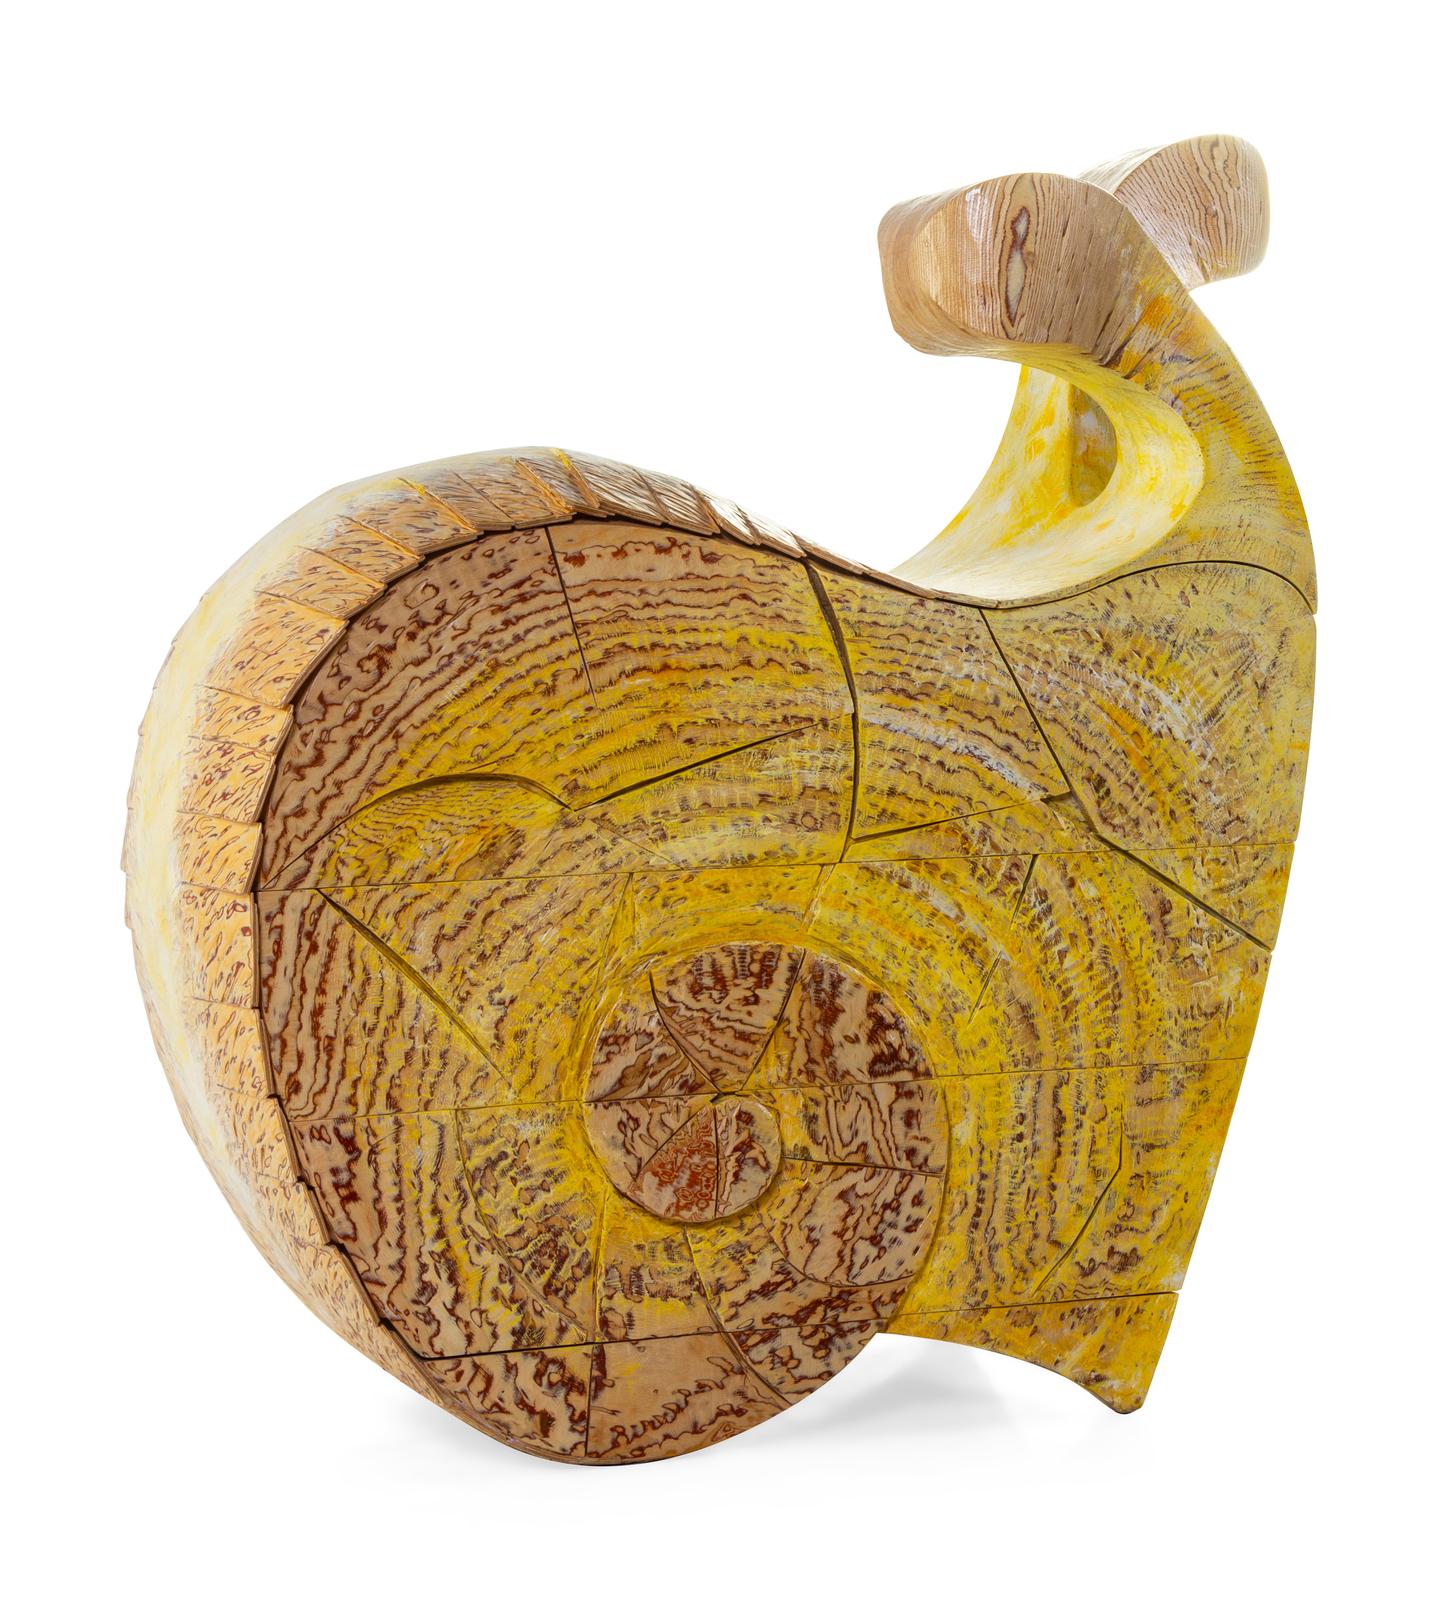 Whimsical and fun Yves Boucard snail chest. Chest of drawers in constructed of wood and hand painted. 

Yves Boucard (Swiss, b. 1953)

Measures: H 51 x W 53 x D 30 inches